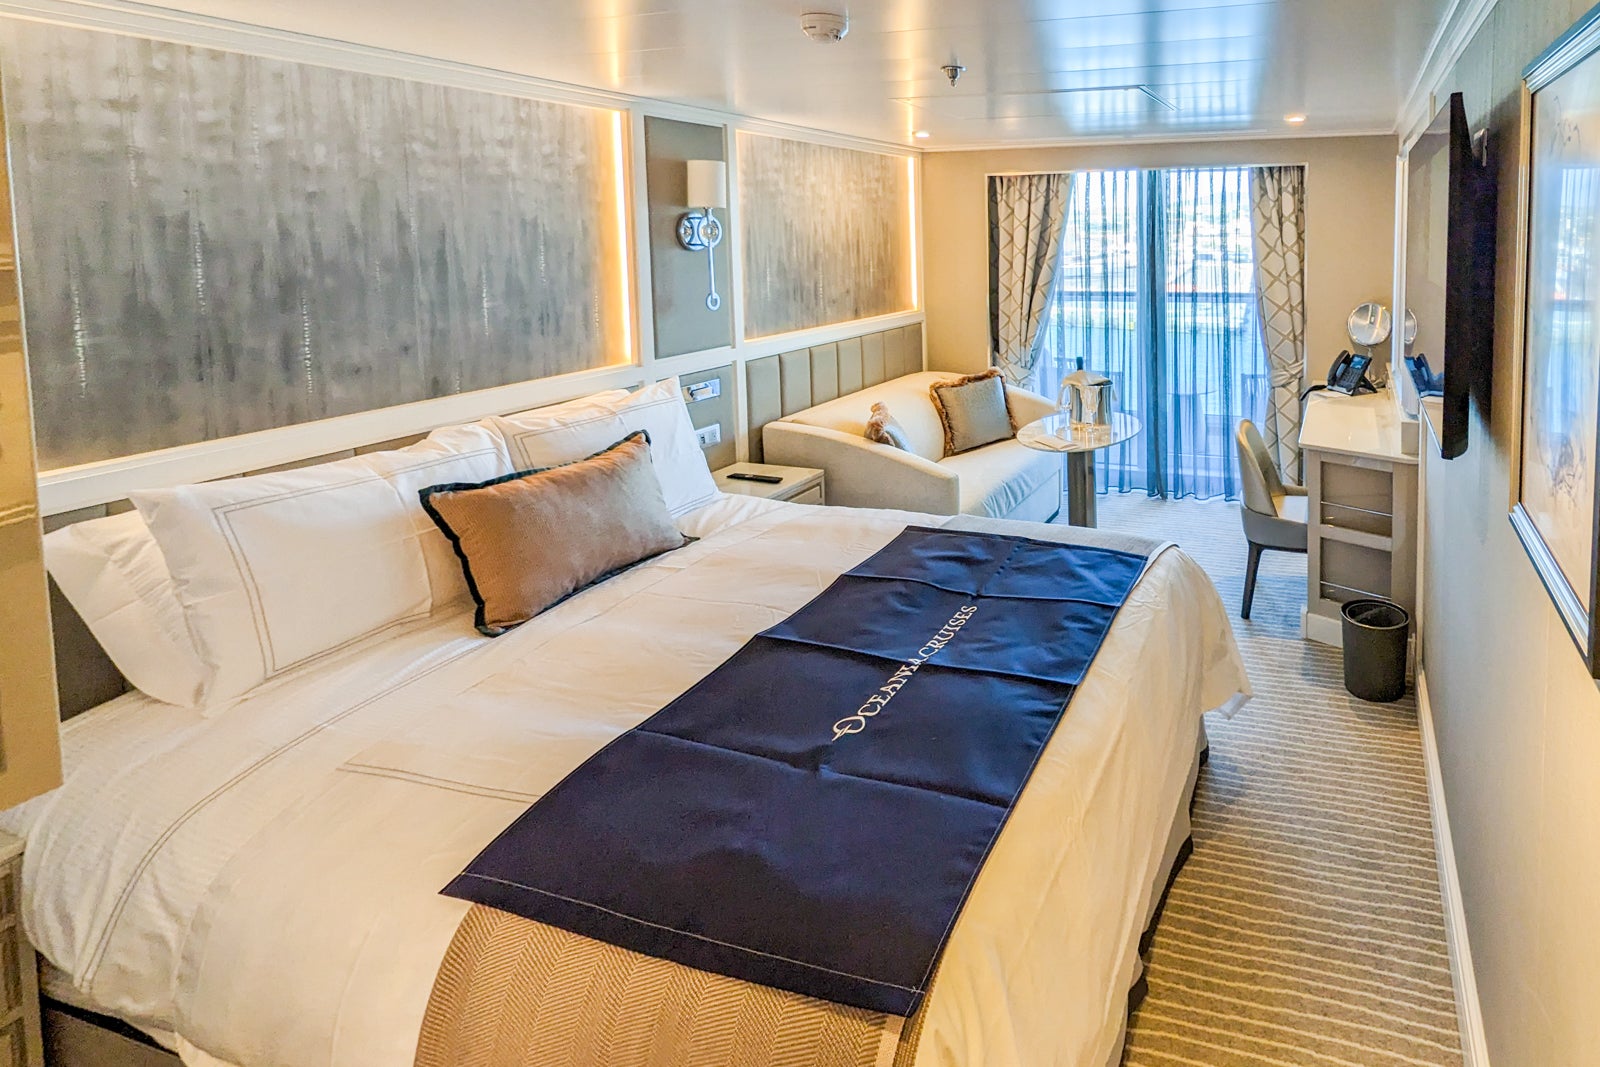 Oceania Cruises balcony cabin with double bed and white couch